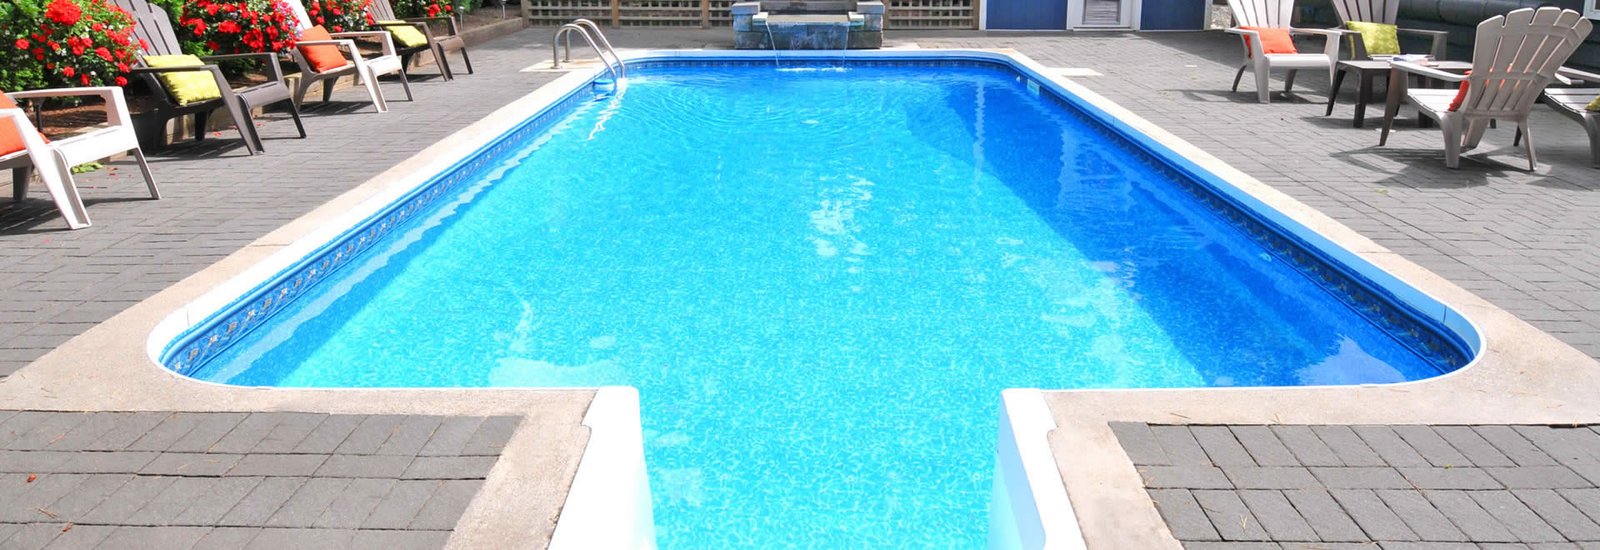 SWIMMING POOL CONSTRUCTION AND RENOVATION